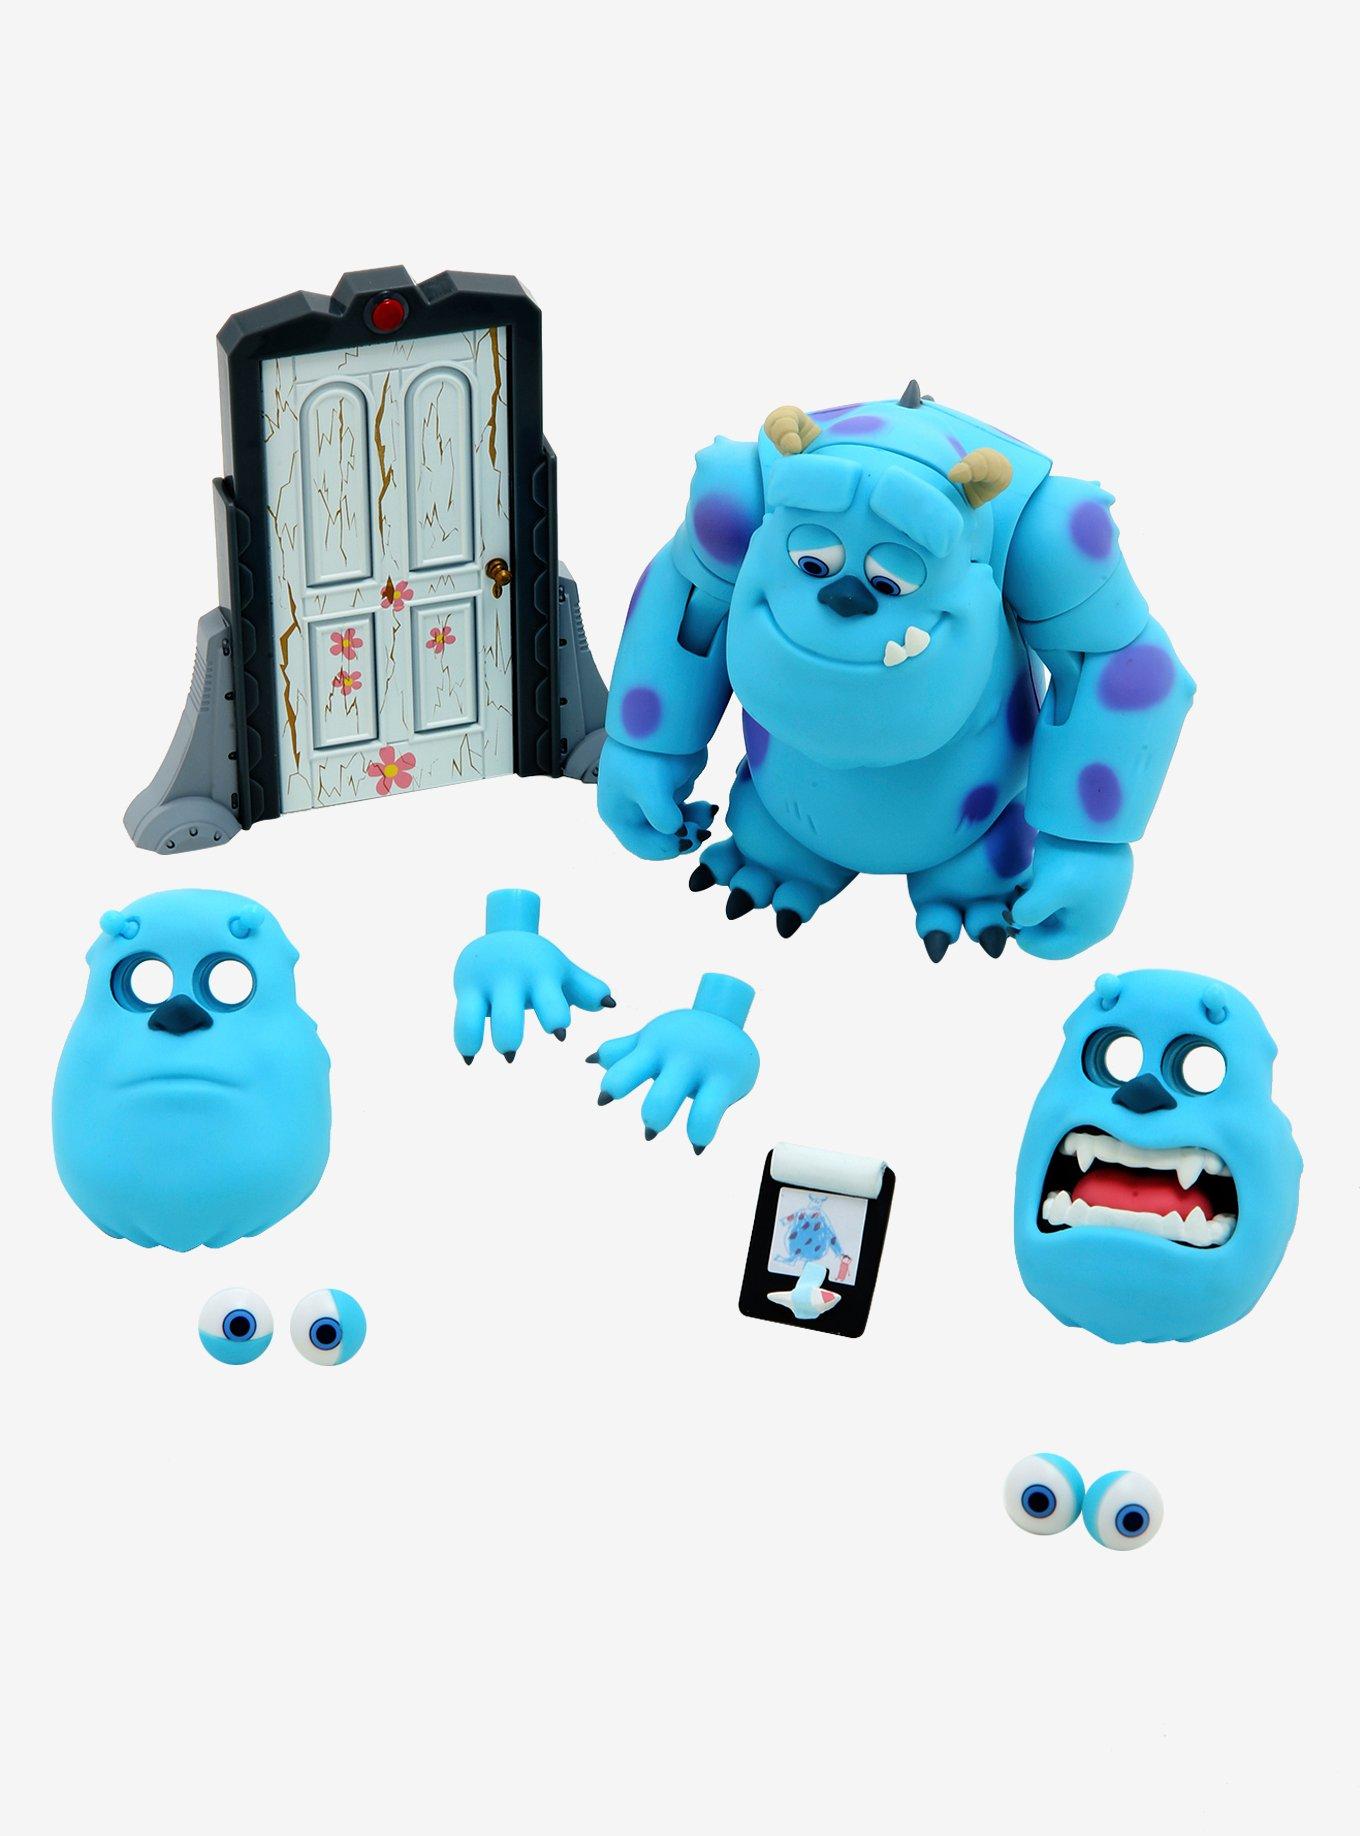 Nendoroid Sulley DX Ver Monsters, Inc